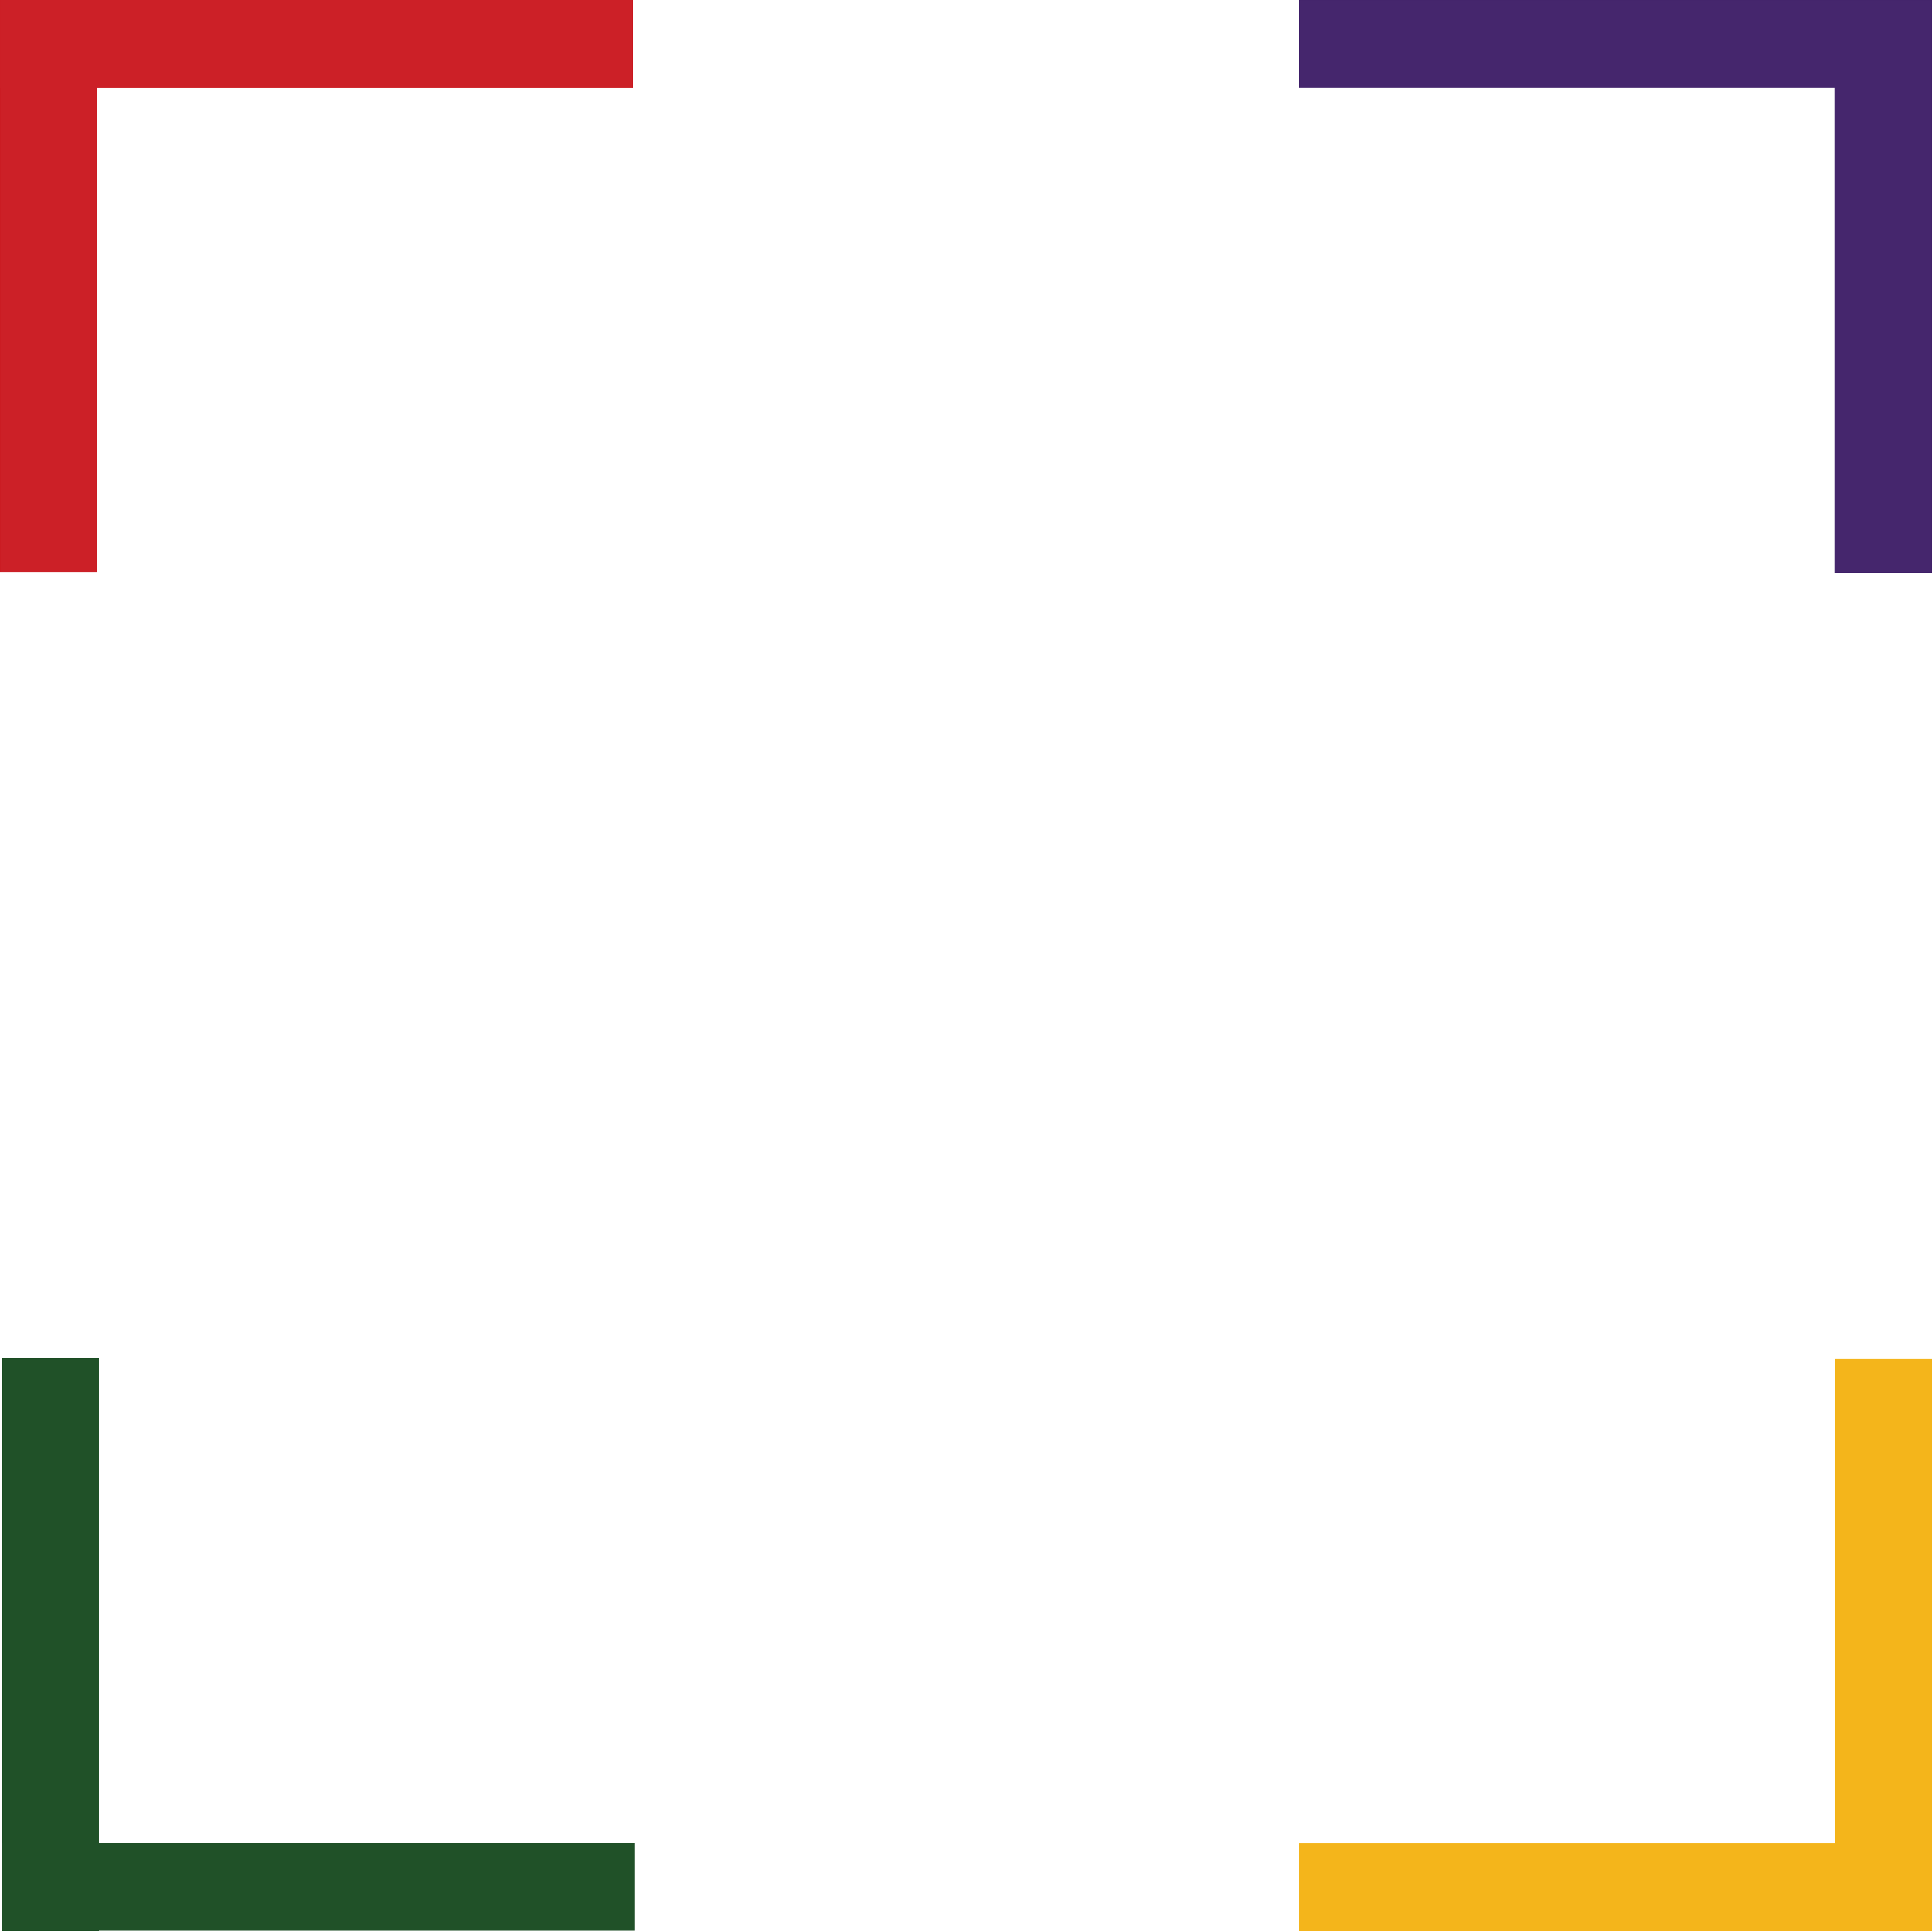 Black Male Voter Project